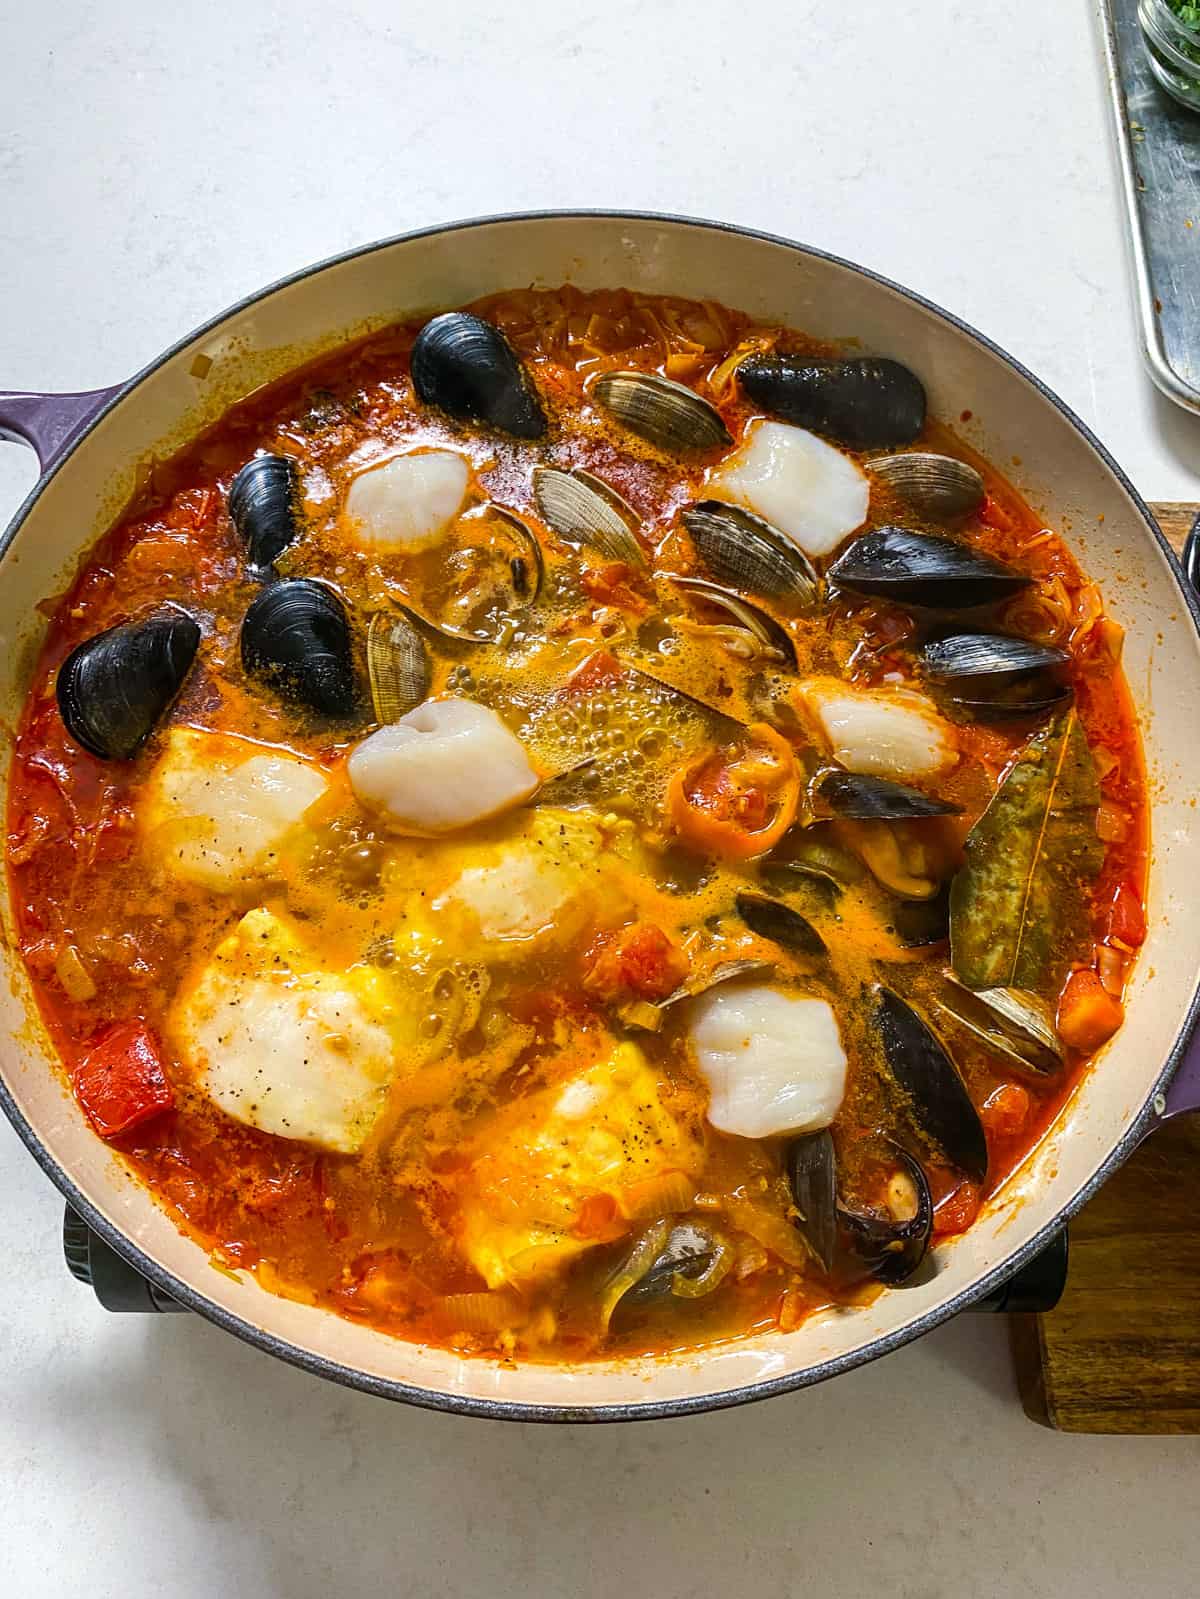 Add the scallops to the simmering bouillabaisse (French seafood stew).